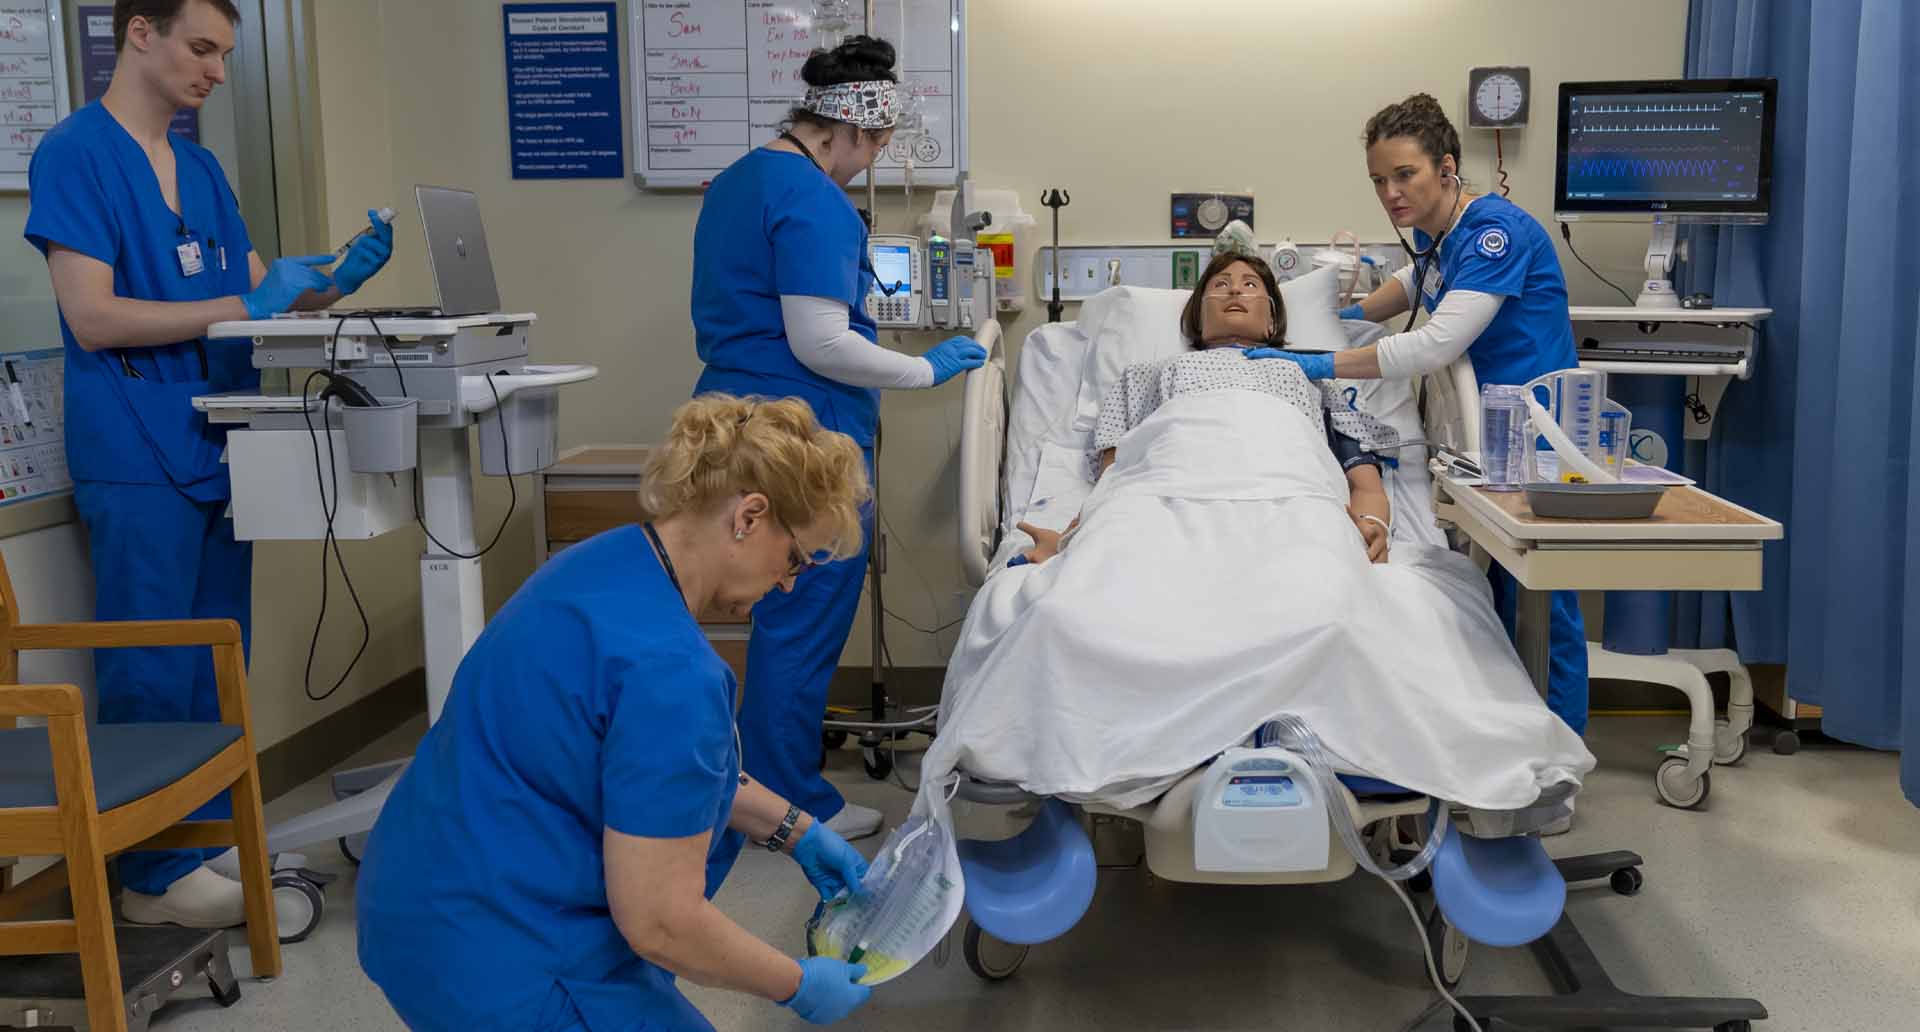 Nursing students (left to right) Dennis Swiontek, 27, of Warren, Kimberly Turner, 60, of Walled Lake, Elyse Vinson, 34, of Clinton Township and Amber Worth, 37, of Mt. Clemens assess the patient and prepare medication in this simulation exercise.  